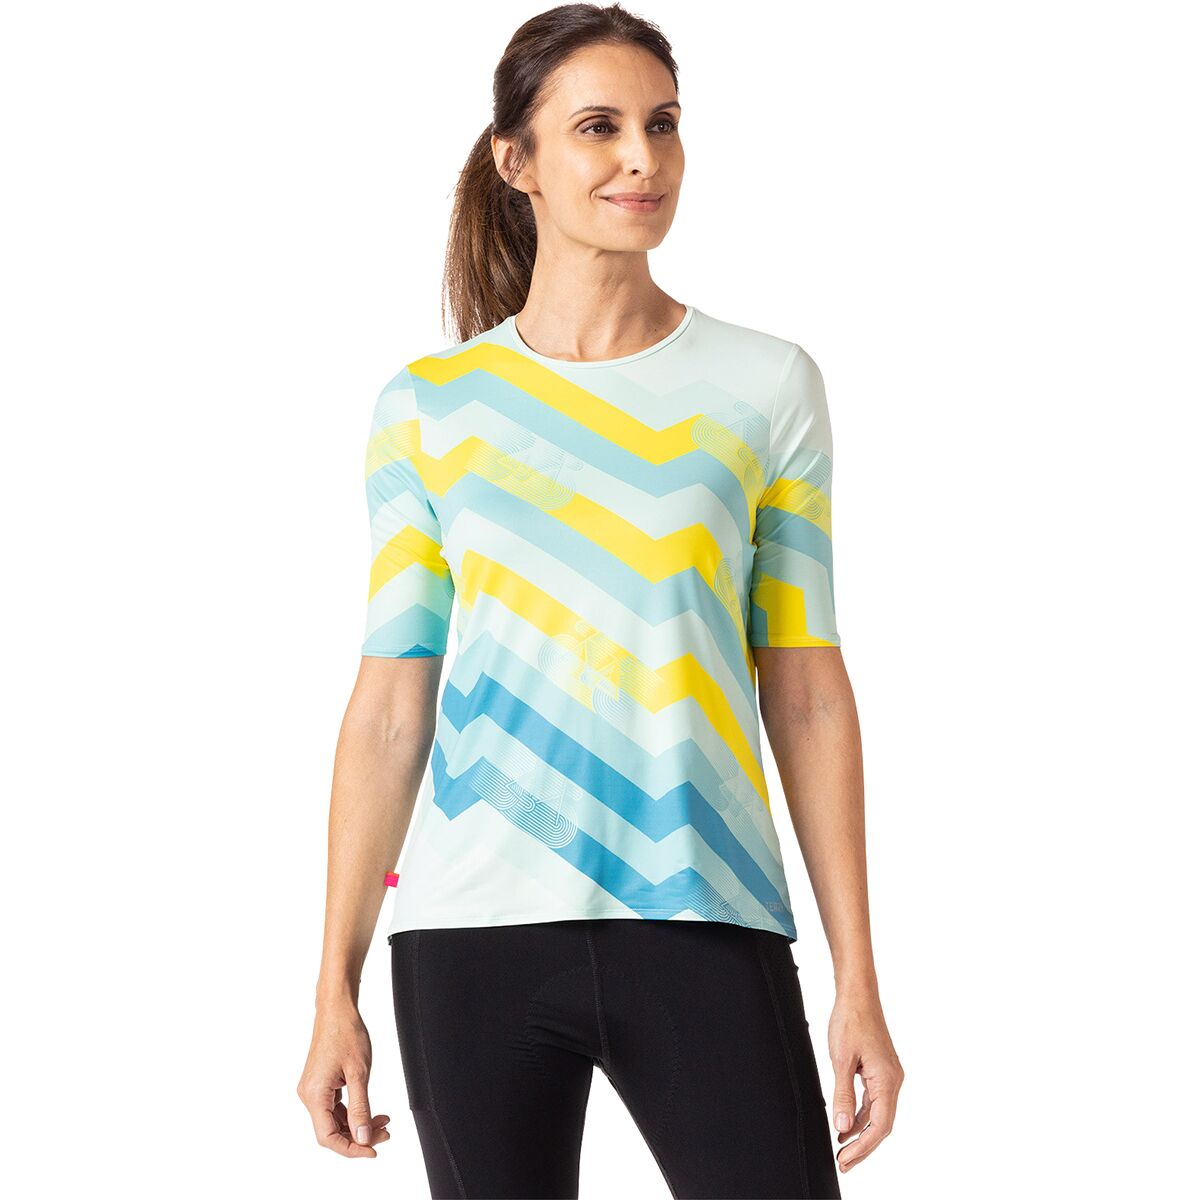 Terry Bicycles Soleil Flow Short-Sleeve Top - Women's Level Up Yellow, M